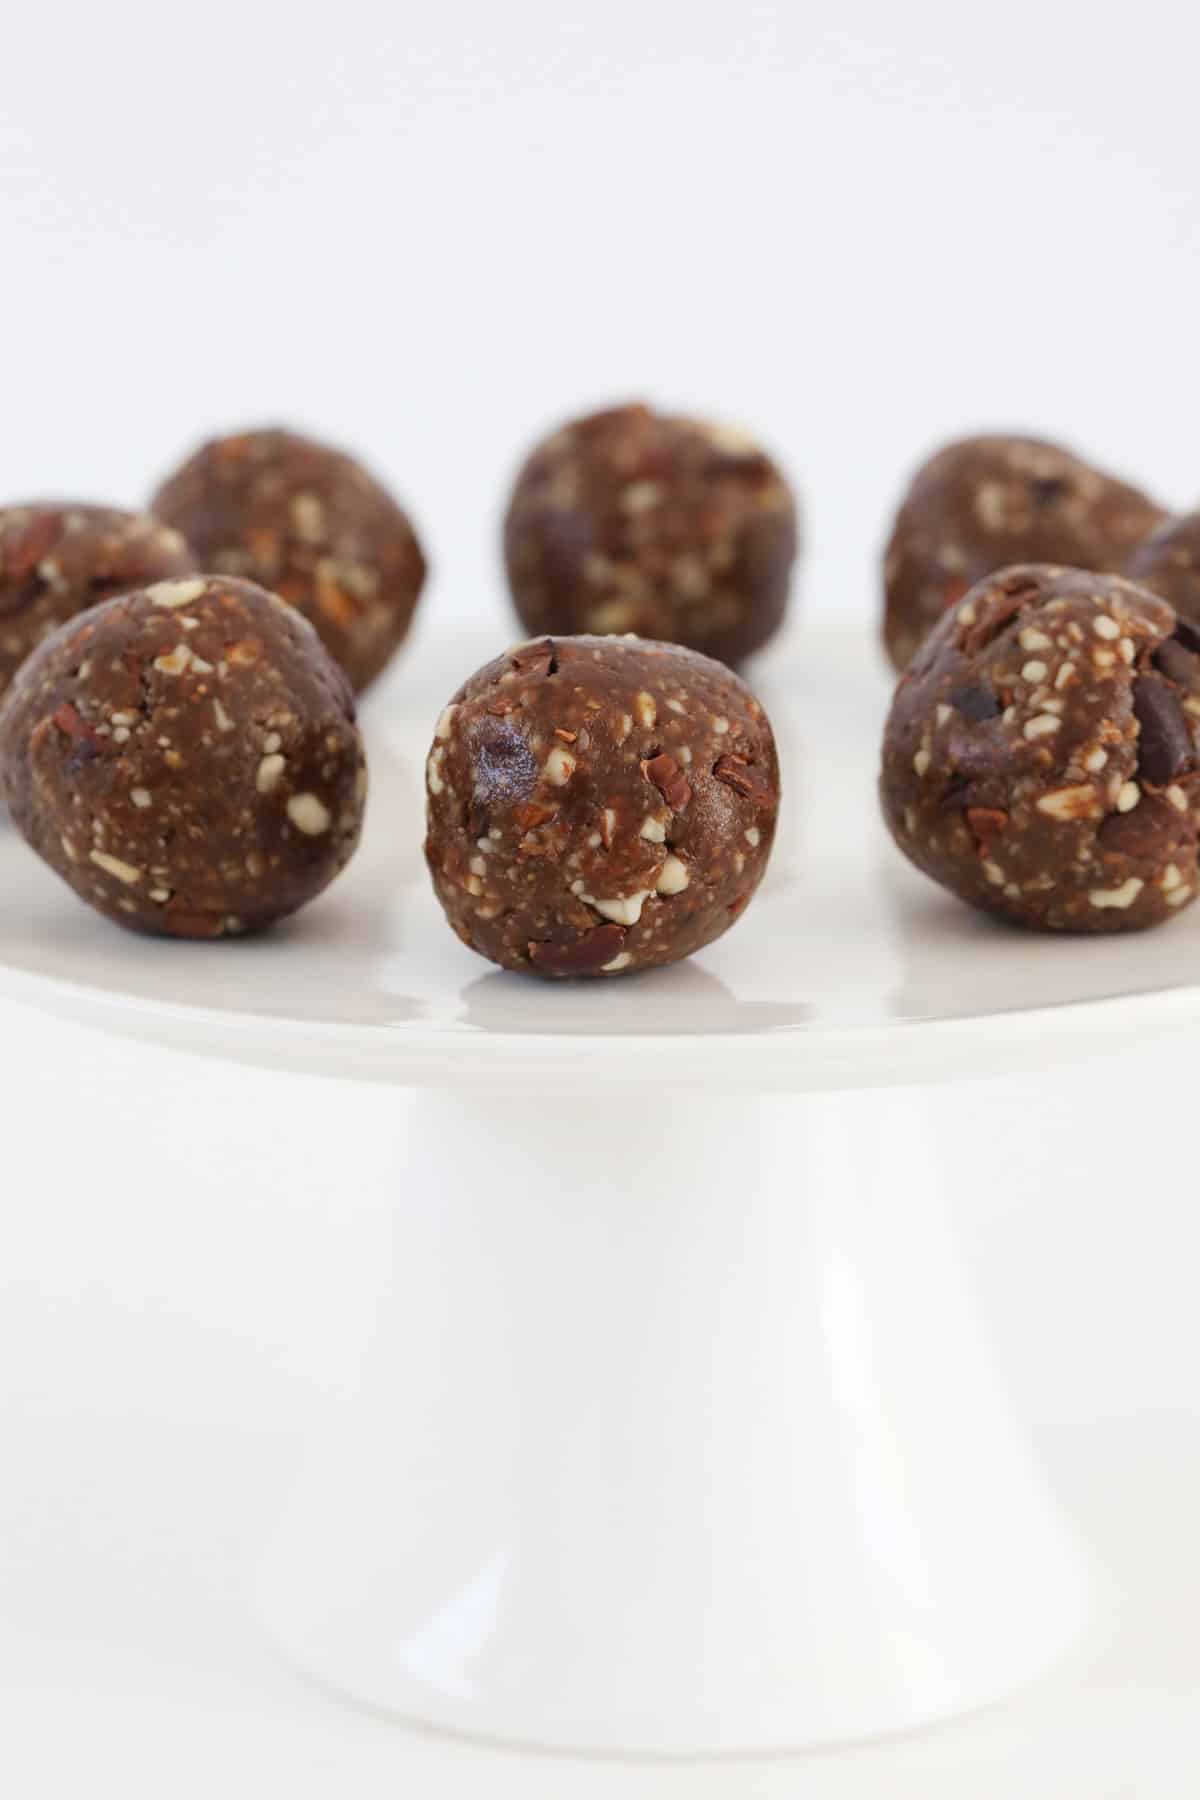 A plate of chocolate brownie bliss balls.